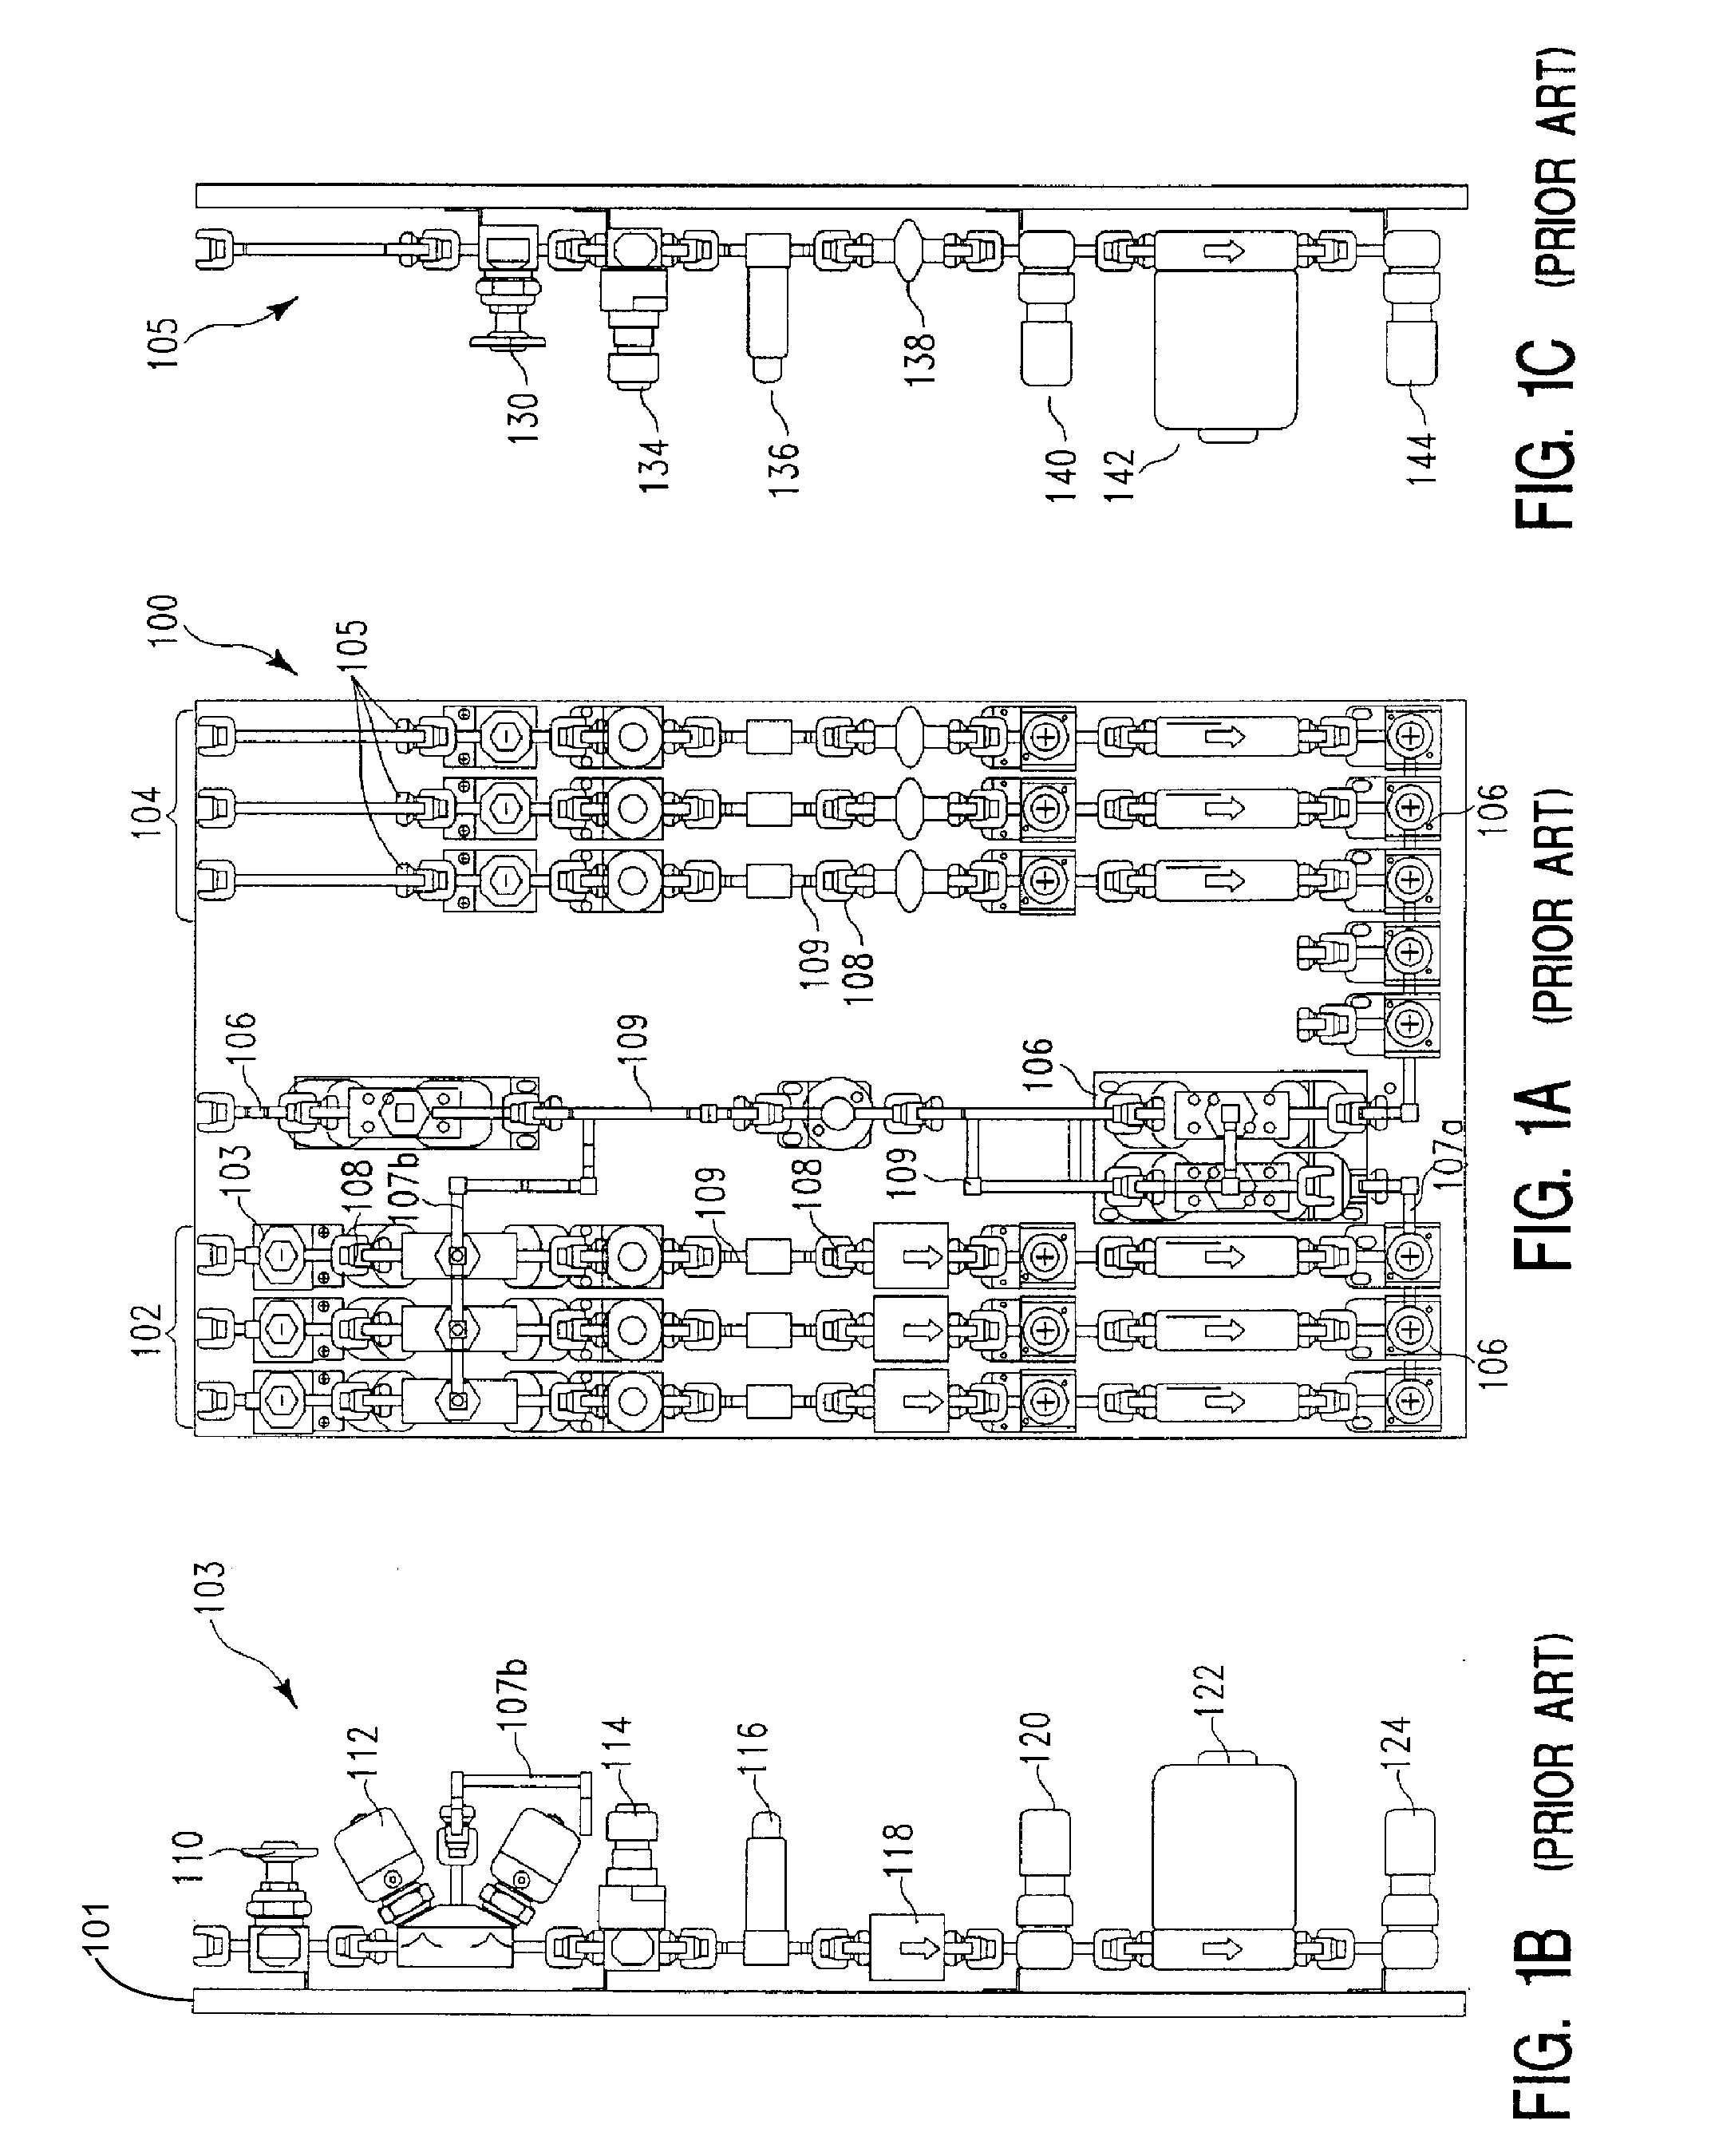 Manifold system for gas and fluid delivery